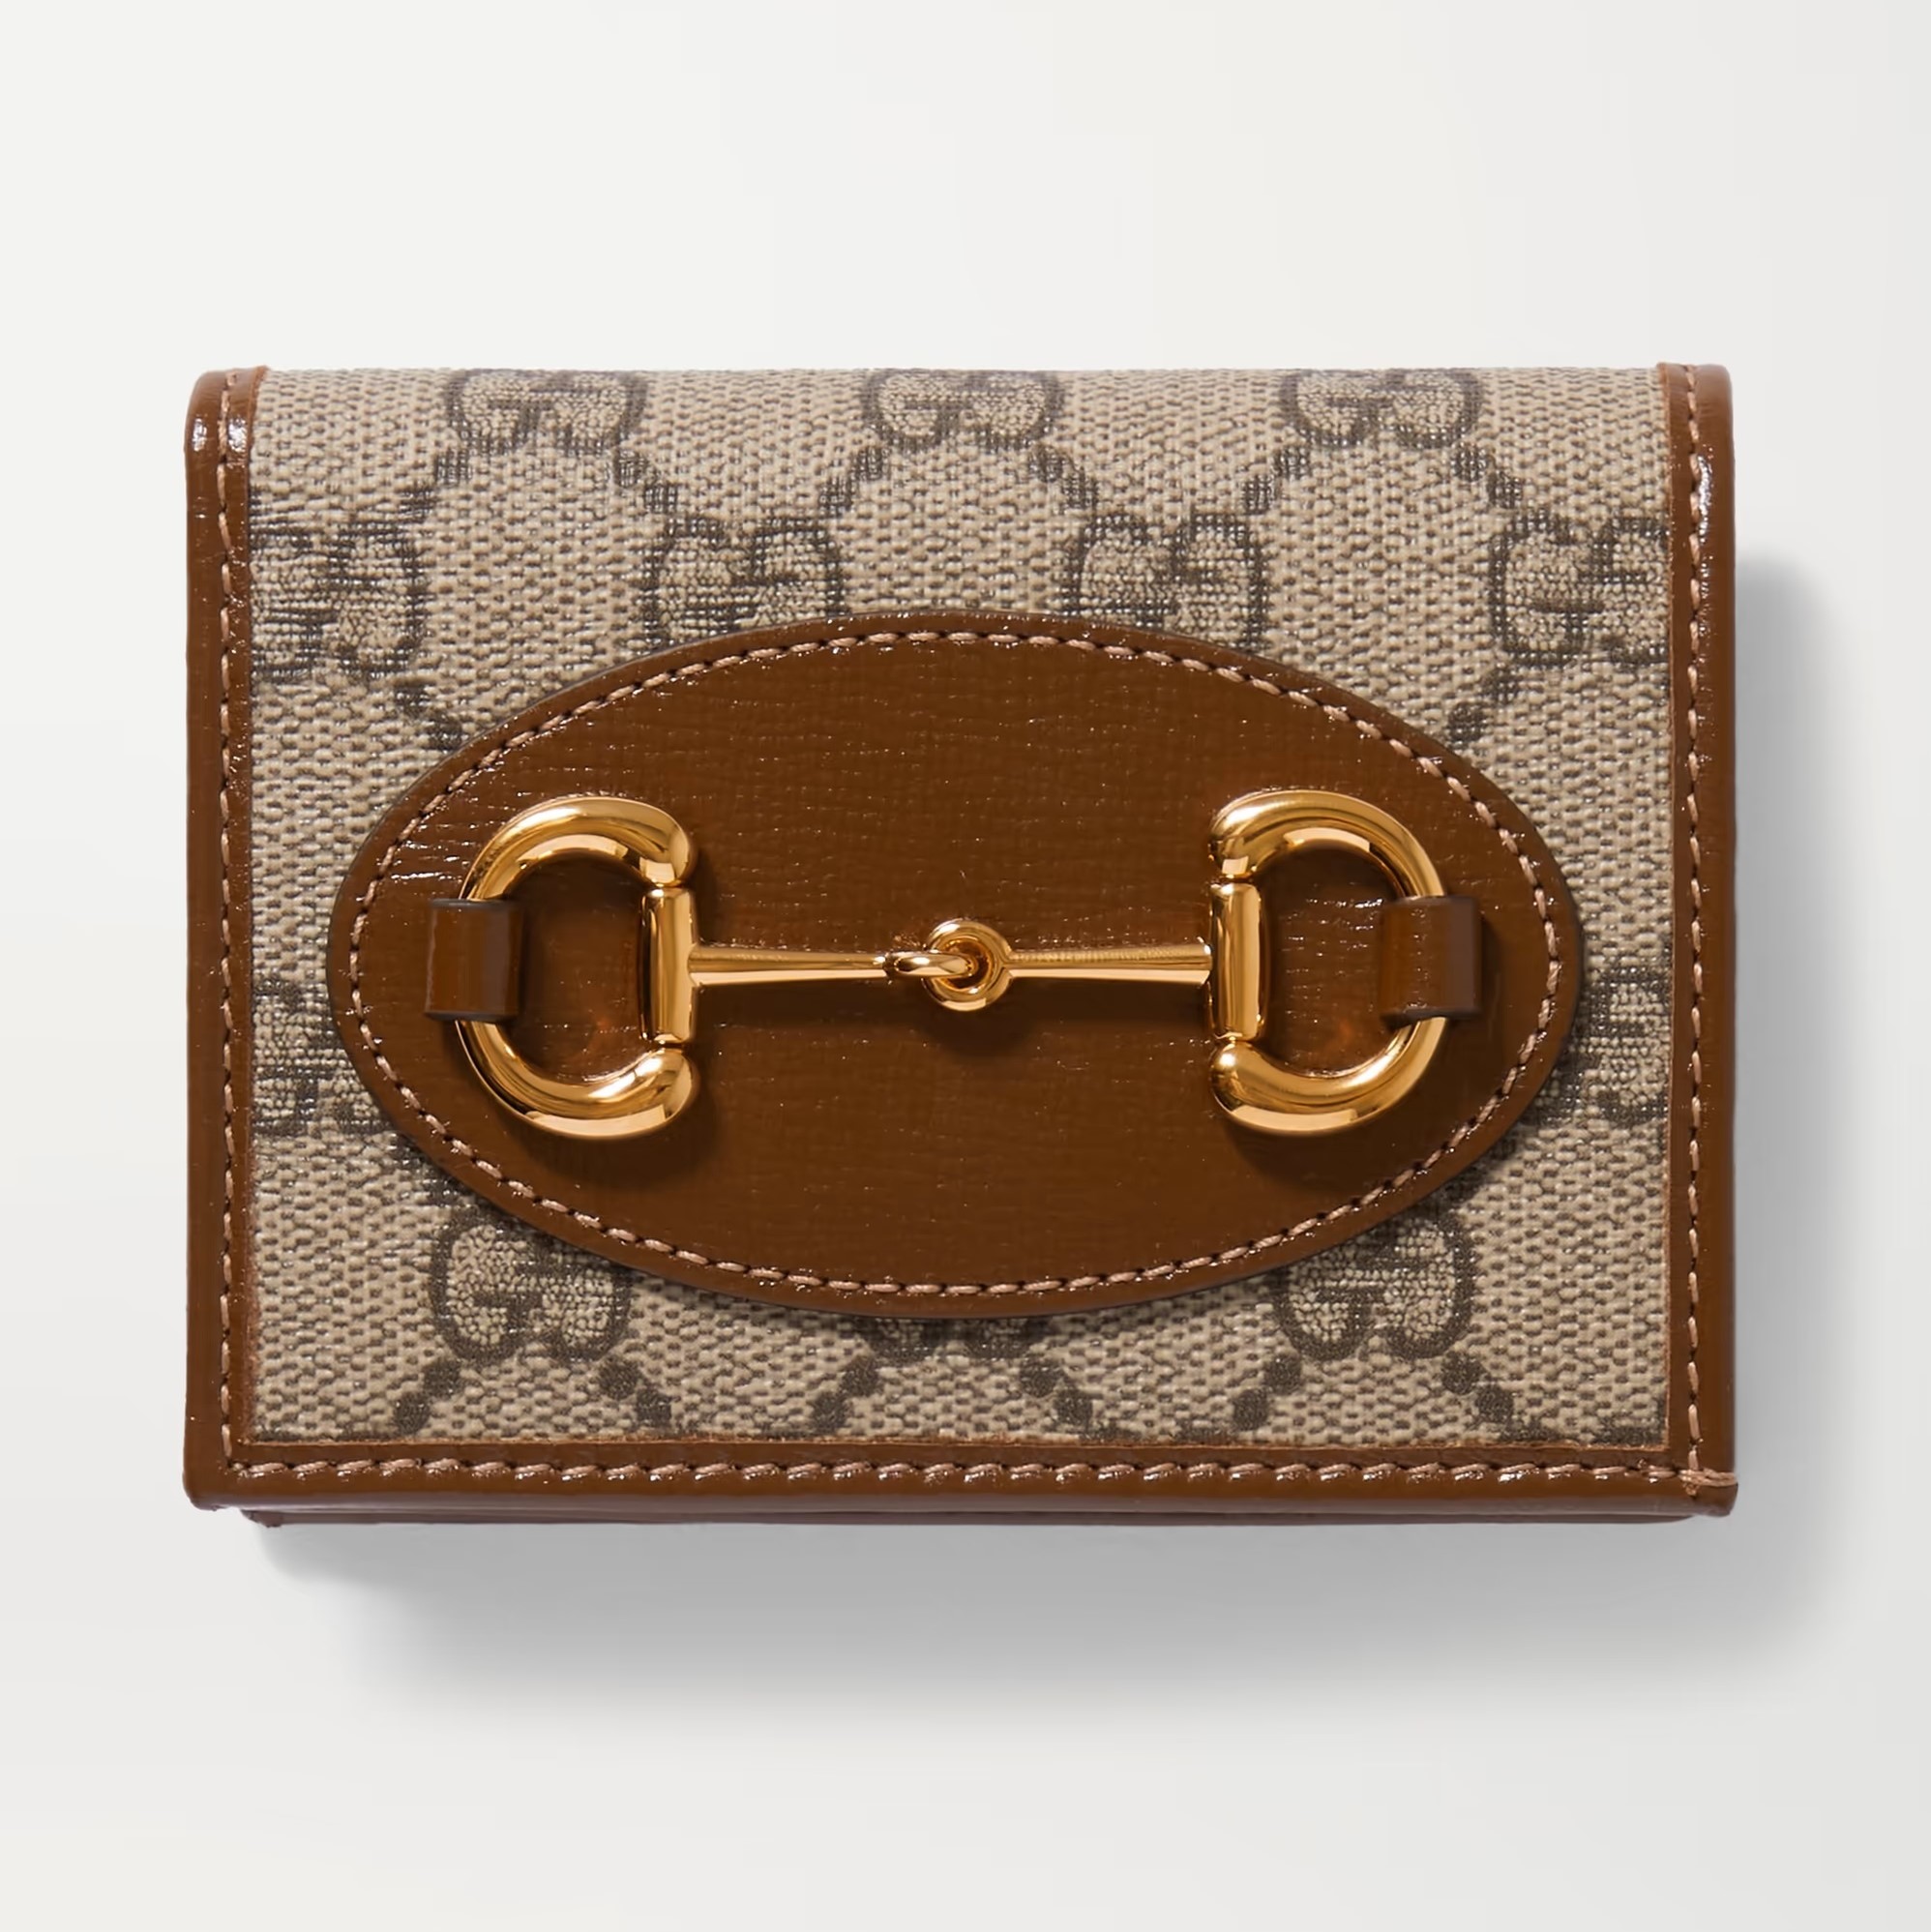 VÍ CẦM TAY NỮ GUCCI HORSEBIT 1955 BEIGE LEATHER TRIMMED PRINTED COATED CANVAS WALLET 2